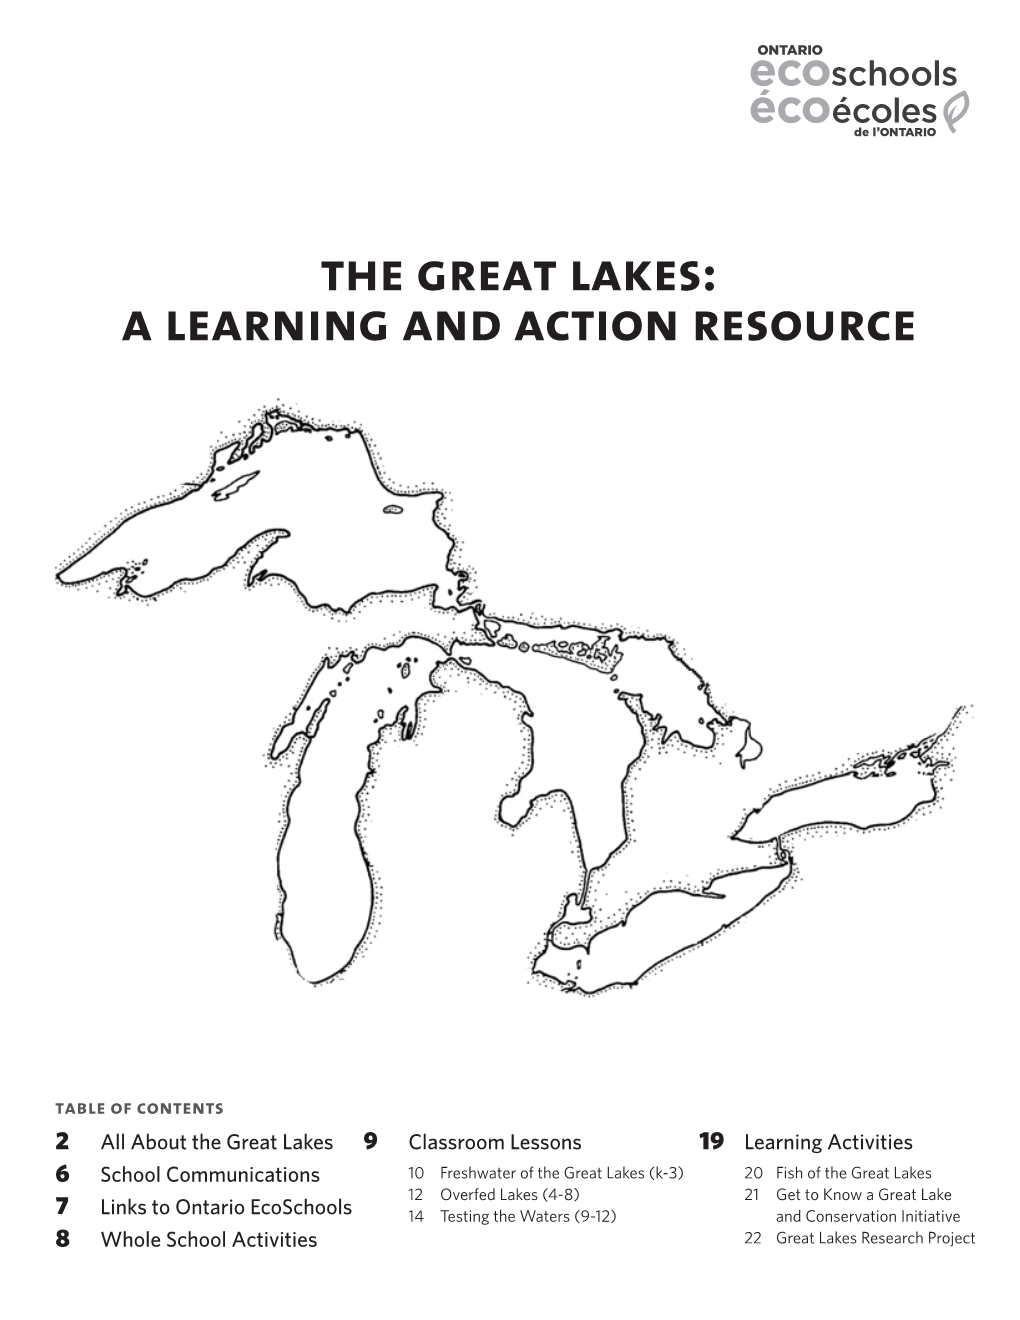 The Great Lakes: a Learning and Action Resource